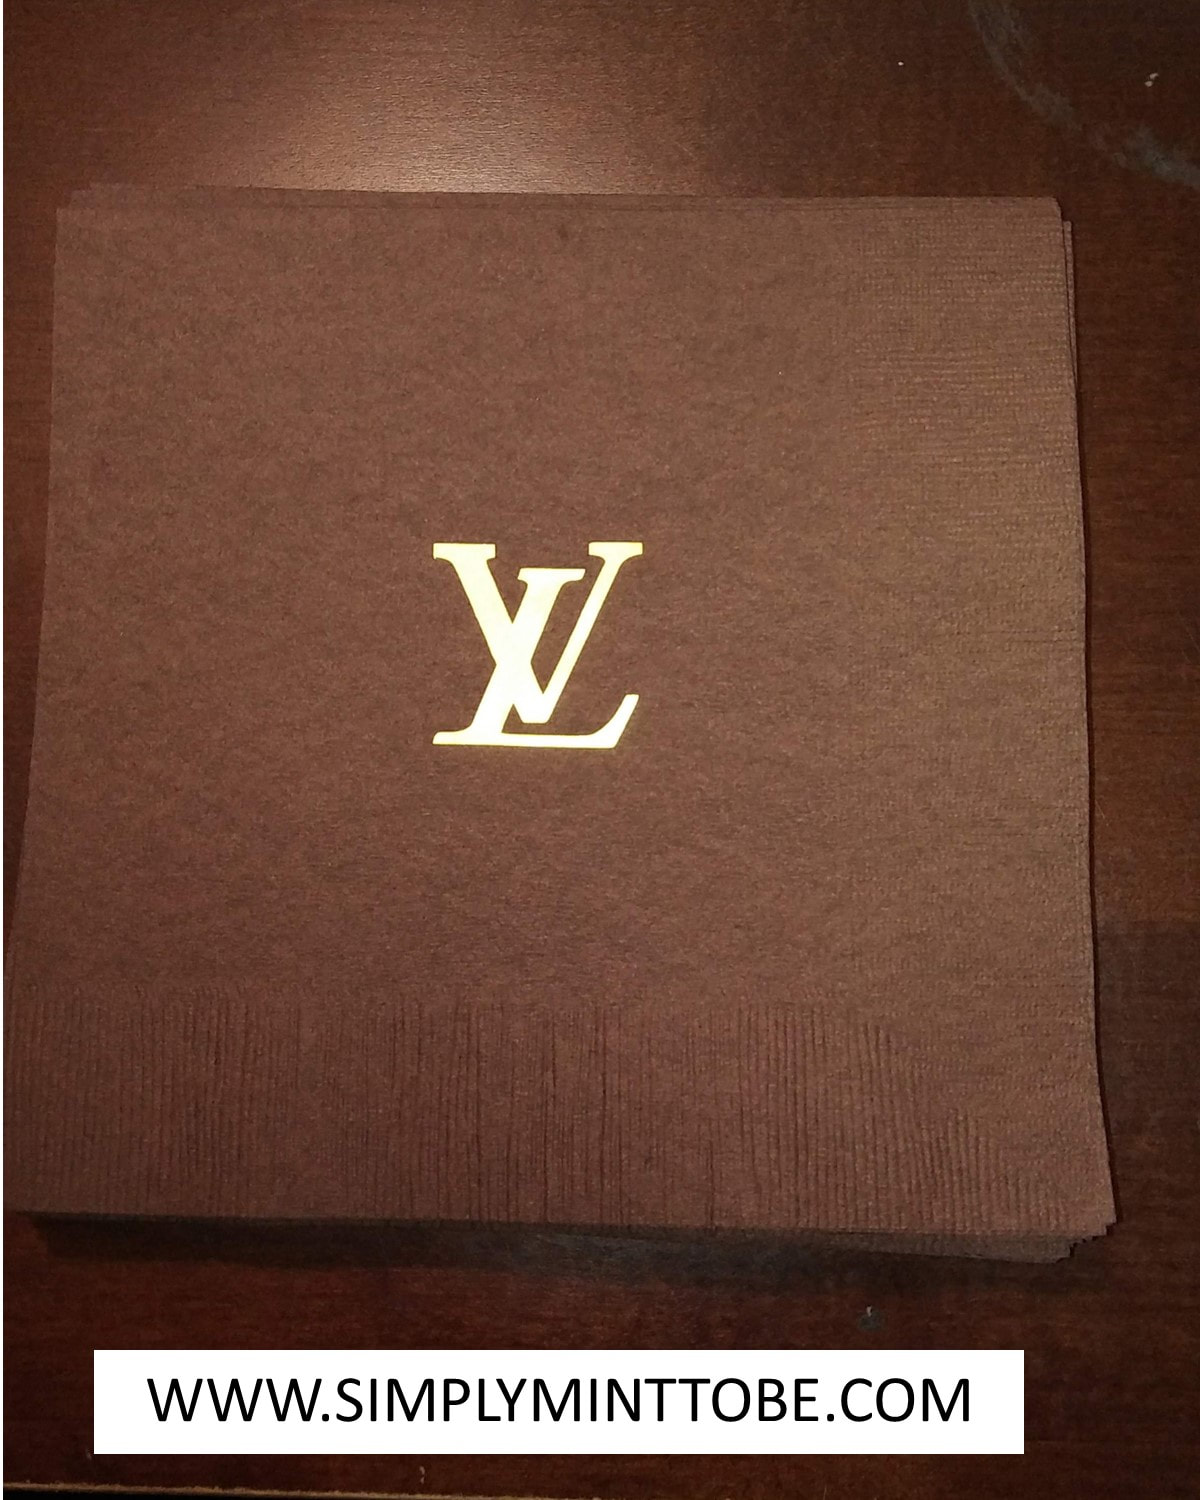 Louis Vuitton Cup Finals Party Invitations by Hyegraph San Francisco